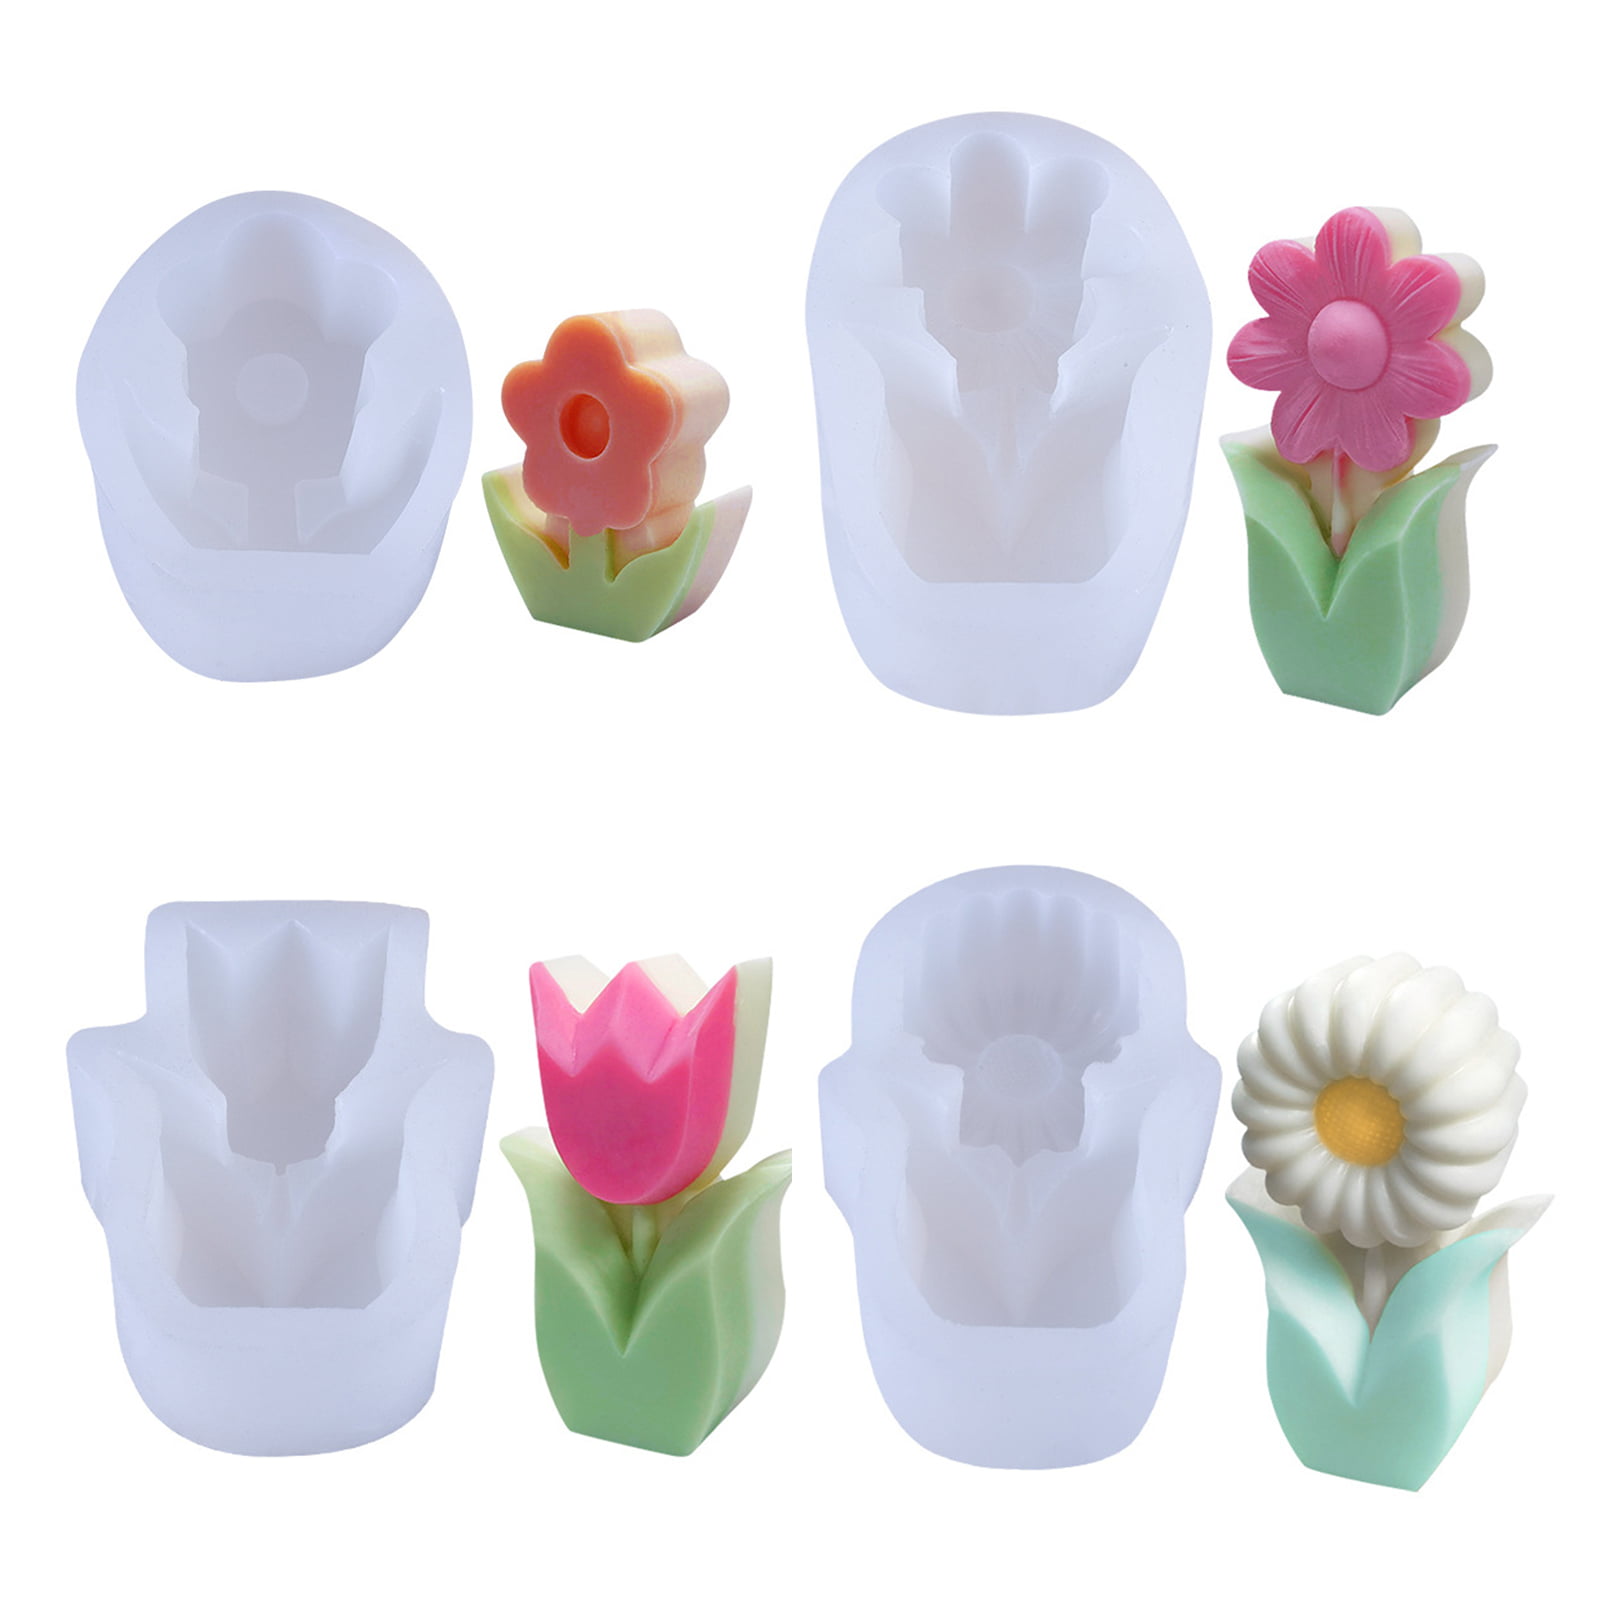 3D Flower Candle Molds, Soap Mold, Food Grade Molds for Making